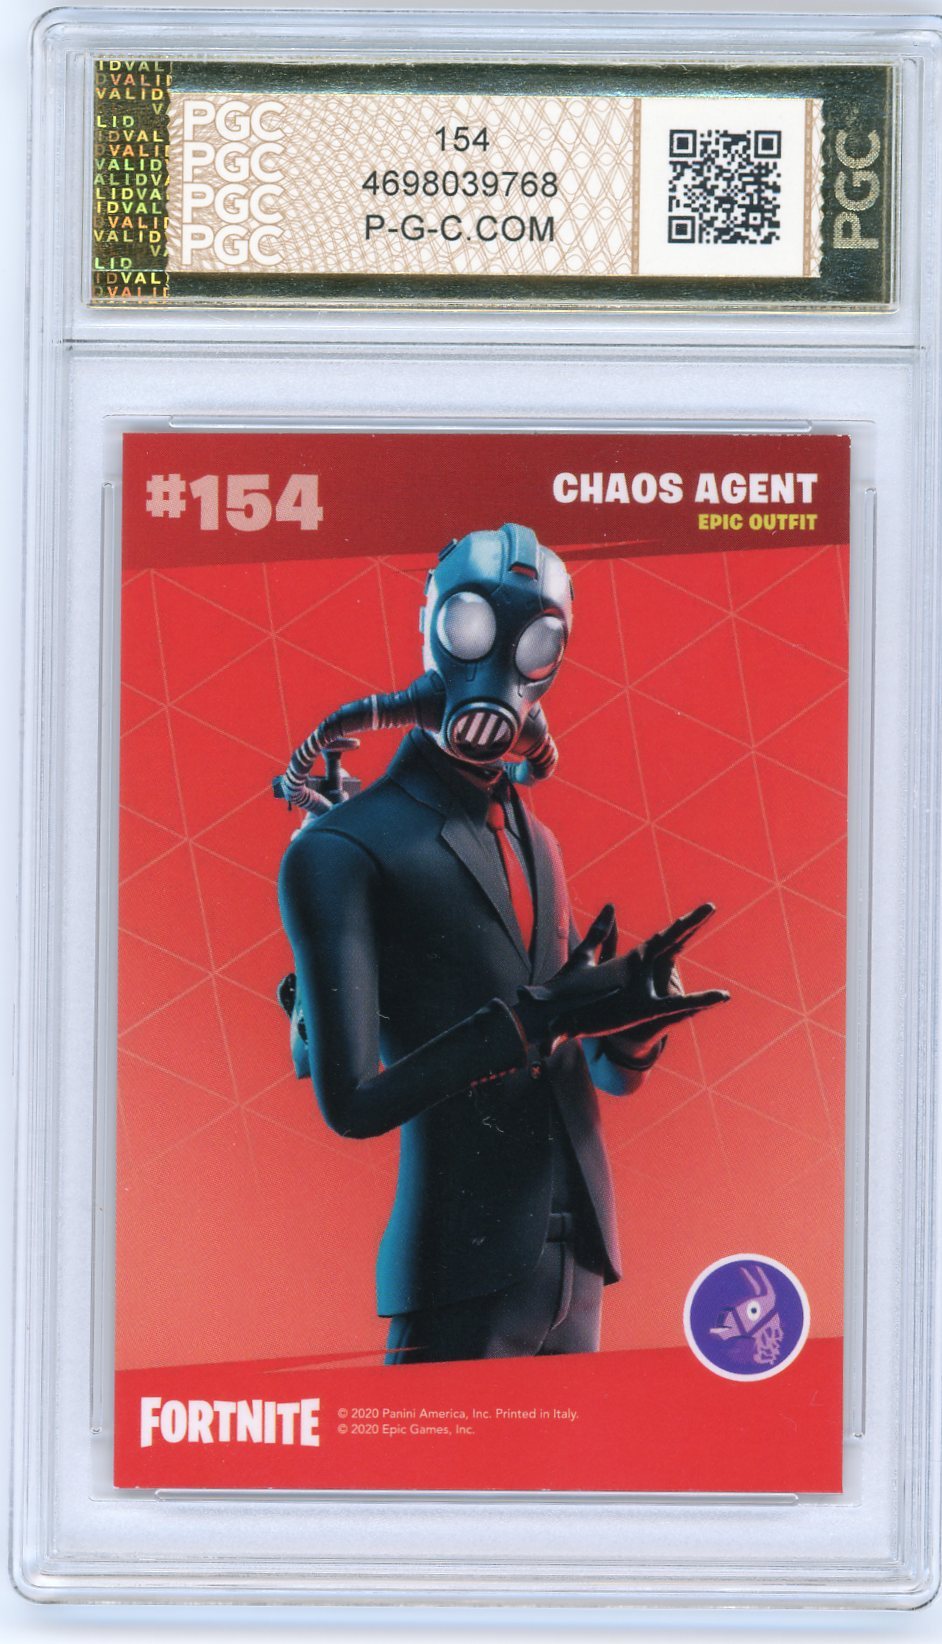 CHAOS AGENT